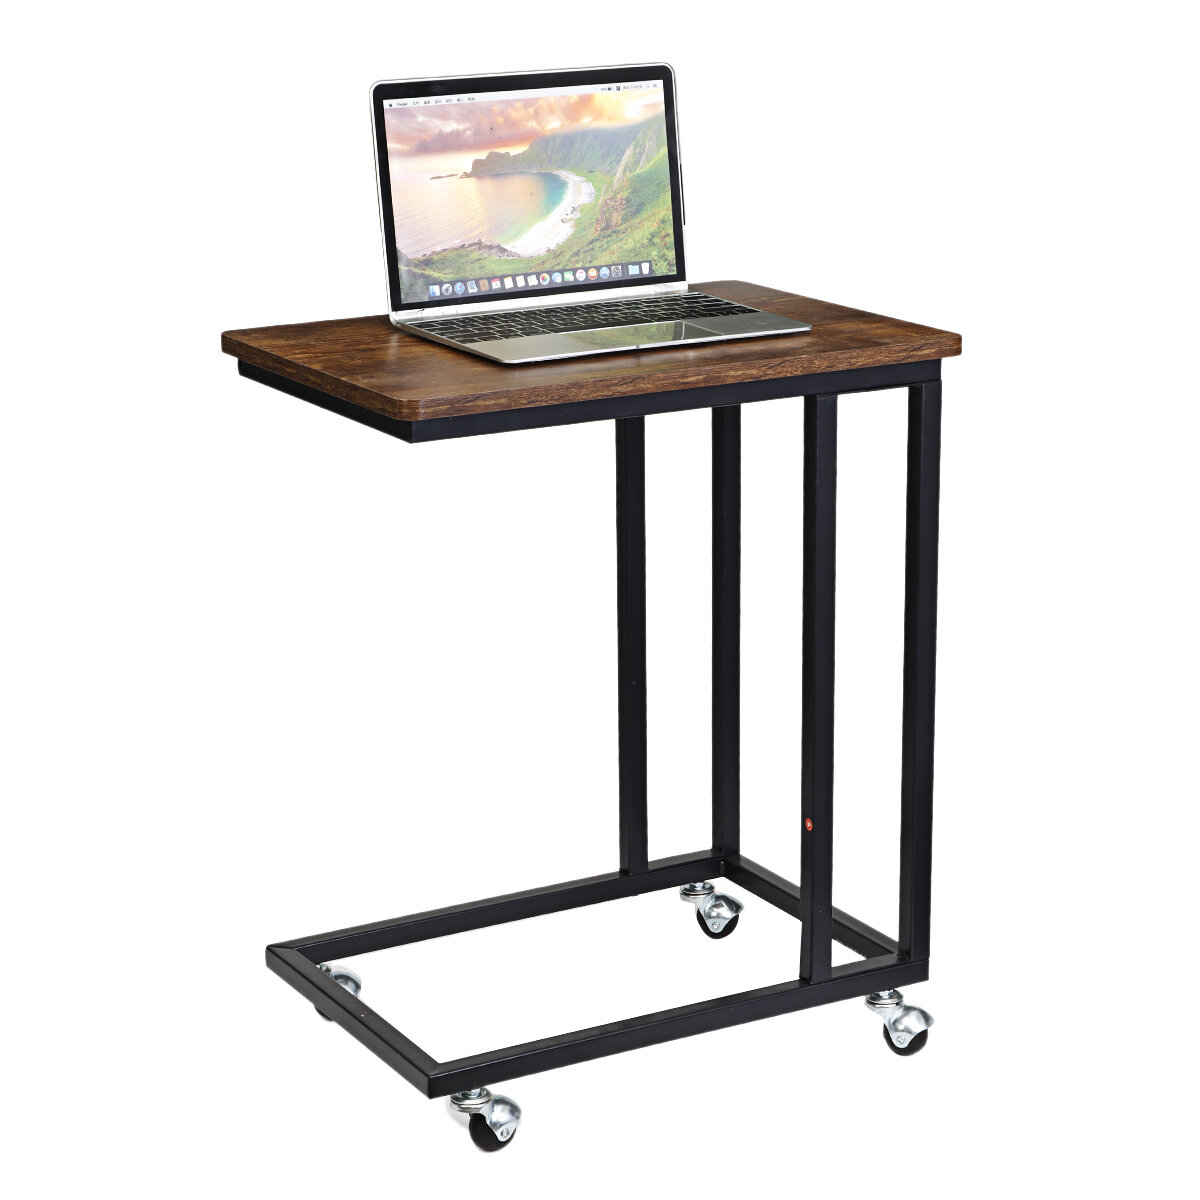 best price,douxlife,dl,st02,mobile,notebook,table,eu,discount